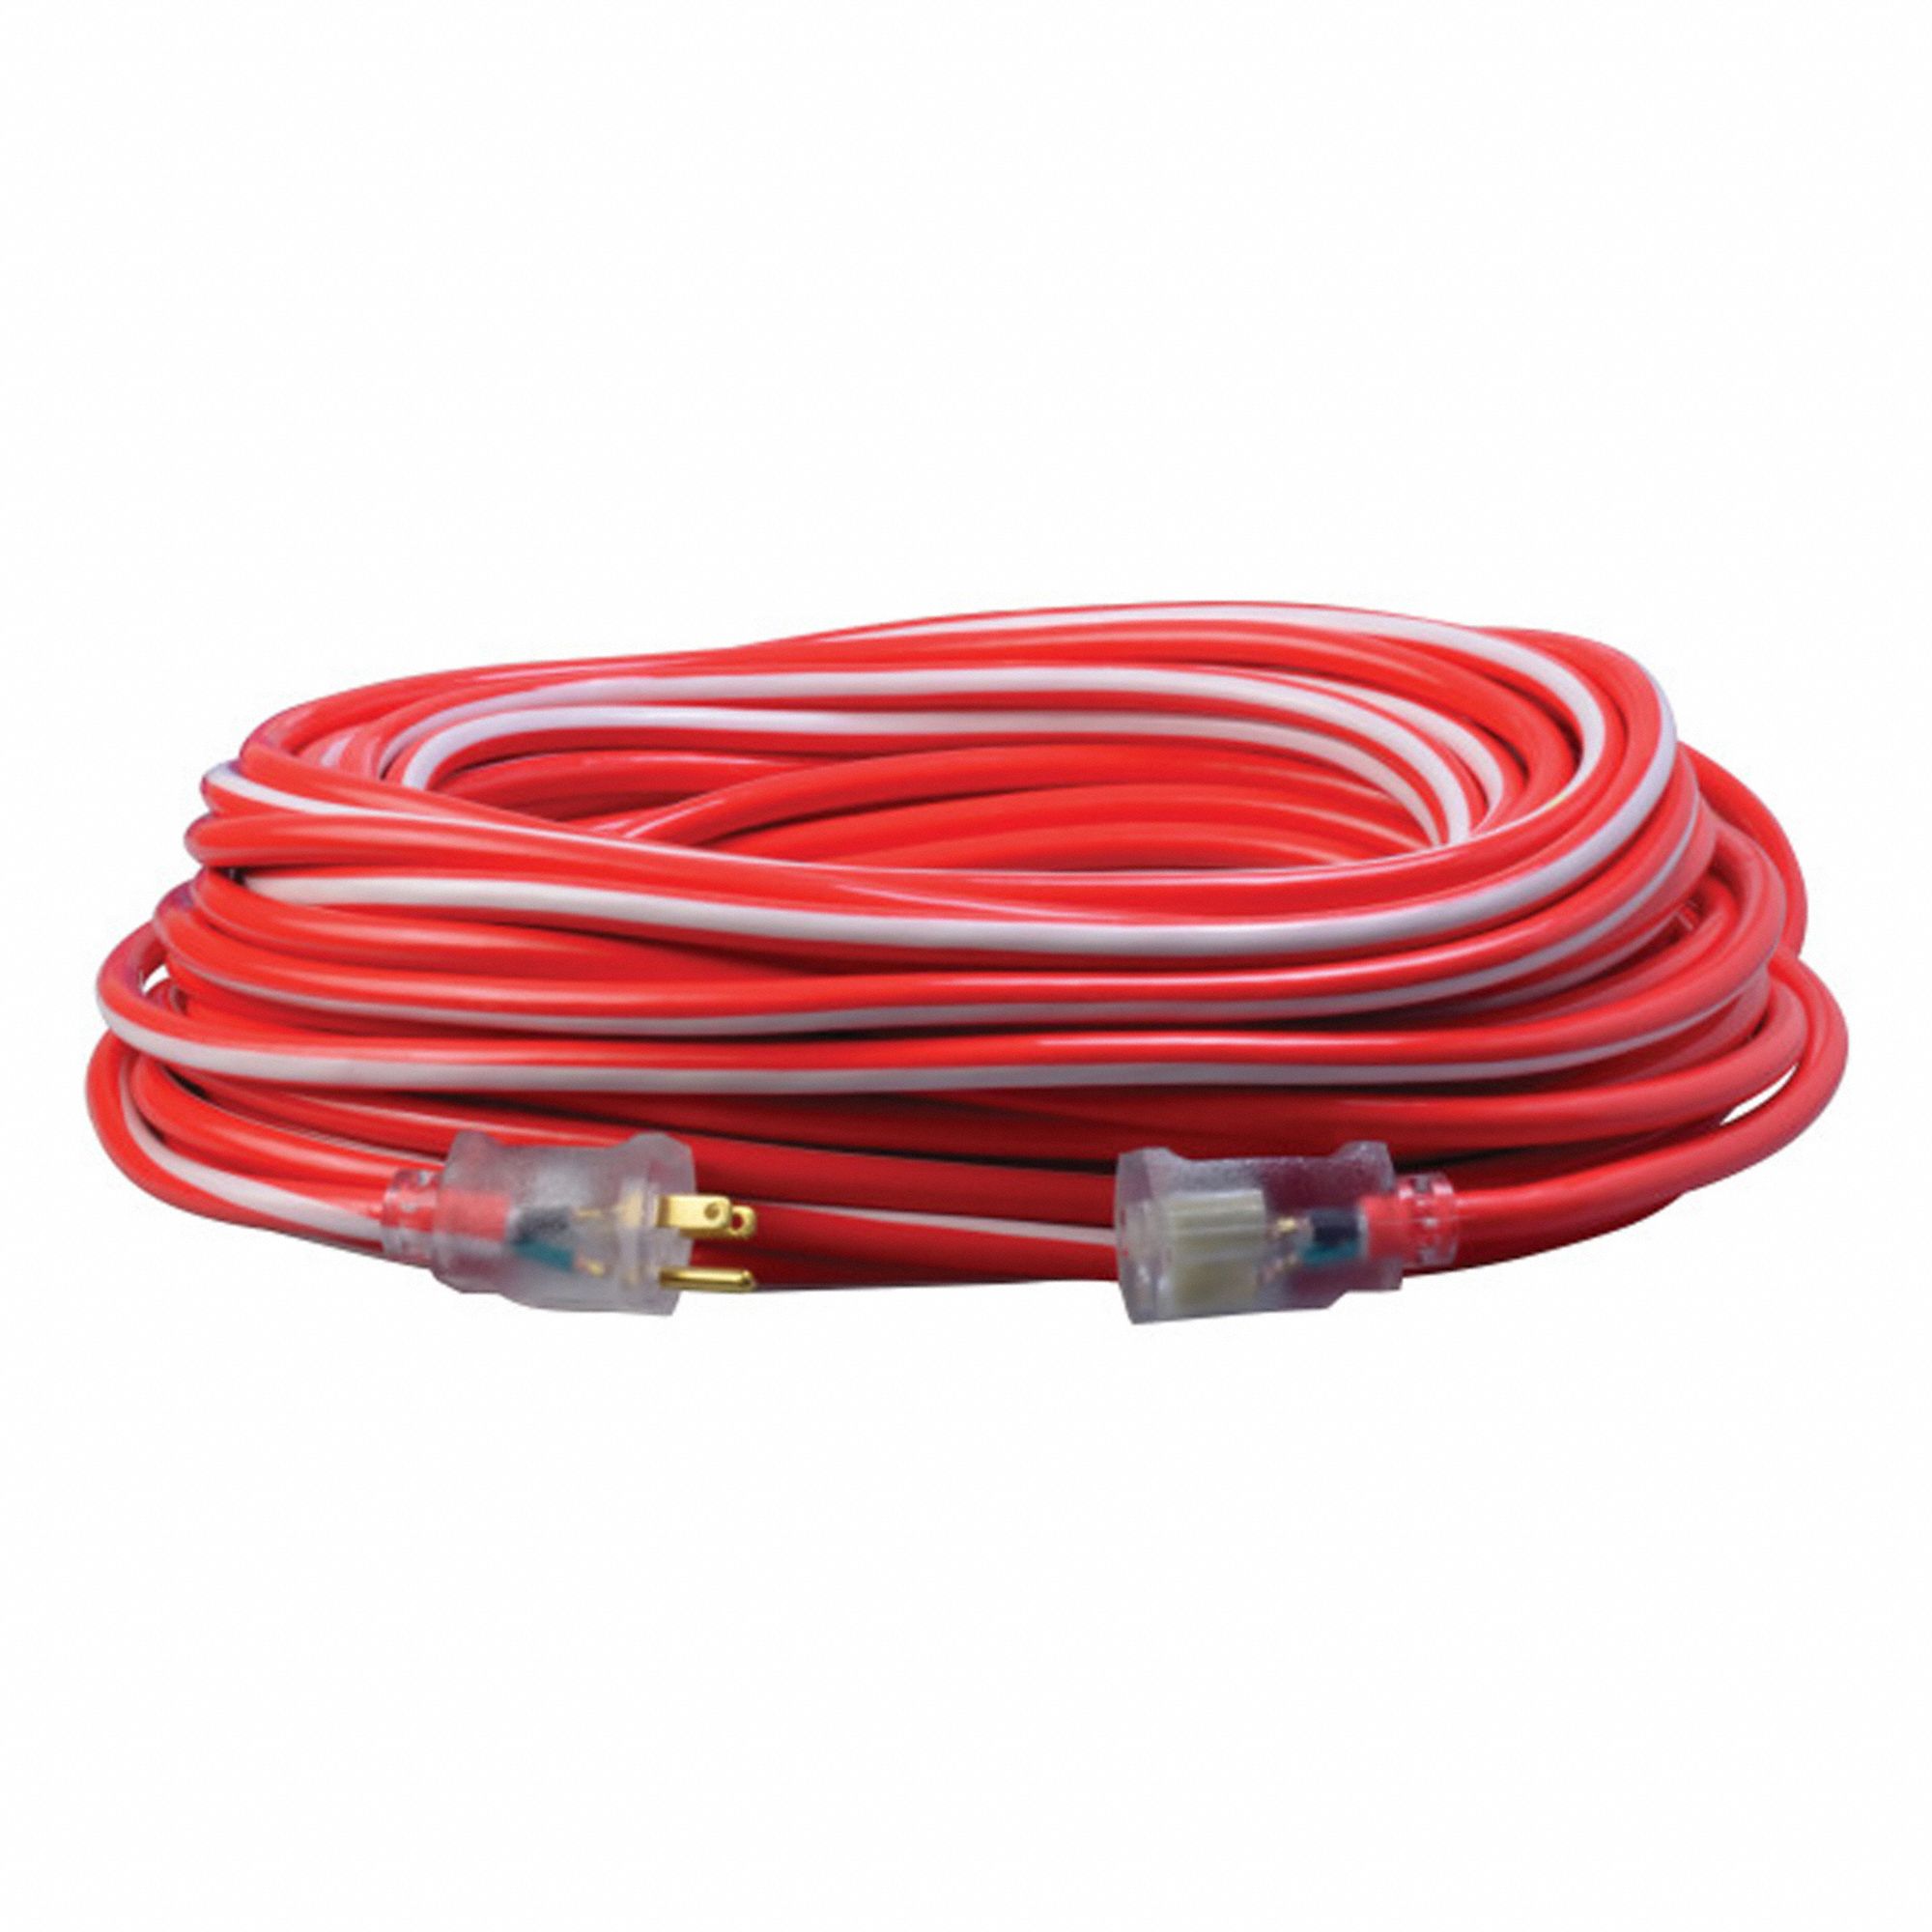 WOODS EXTENSION CORD, 100 FEET, 15 AMPS, 300 VOLTS, SJTW, RED